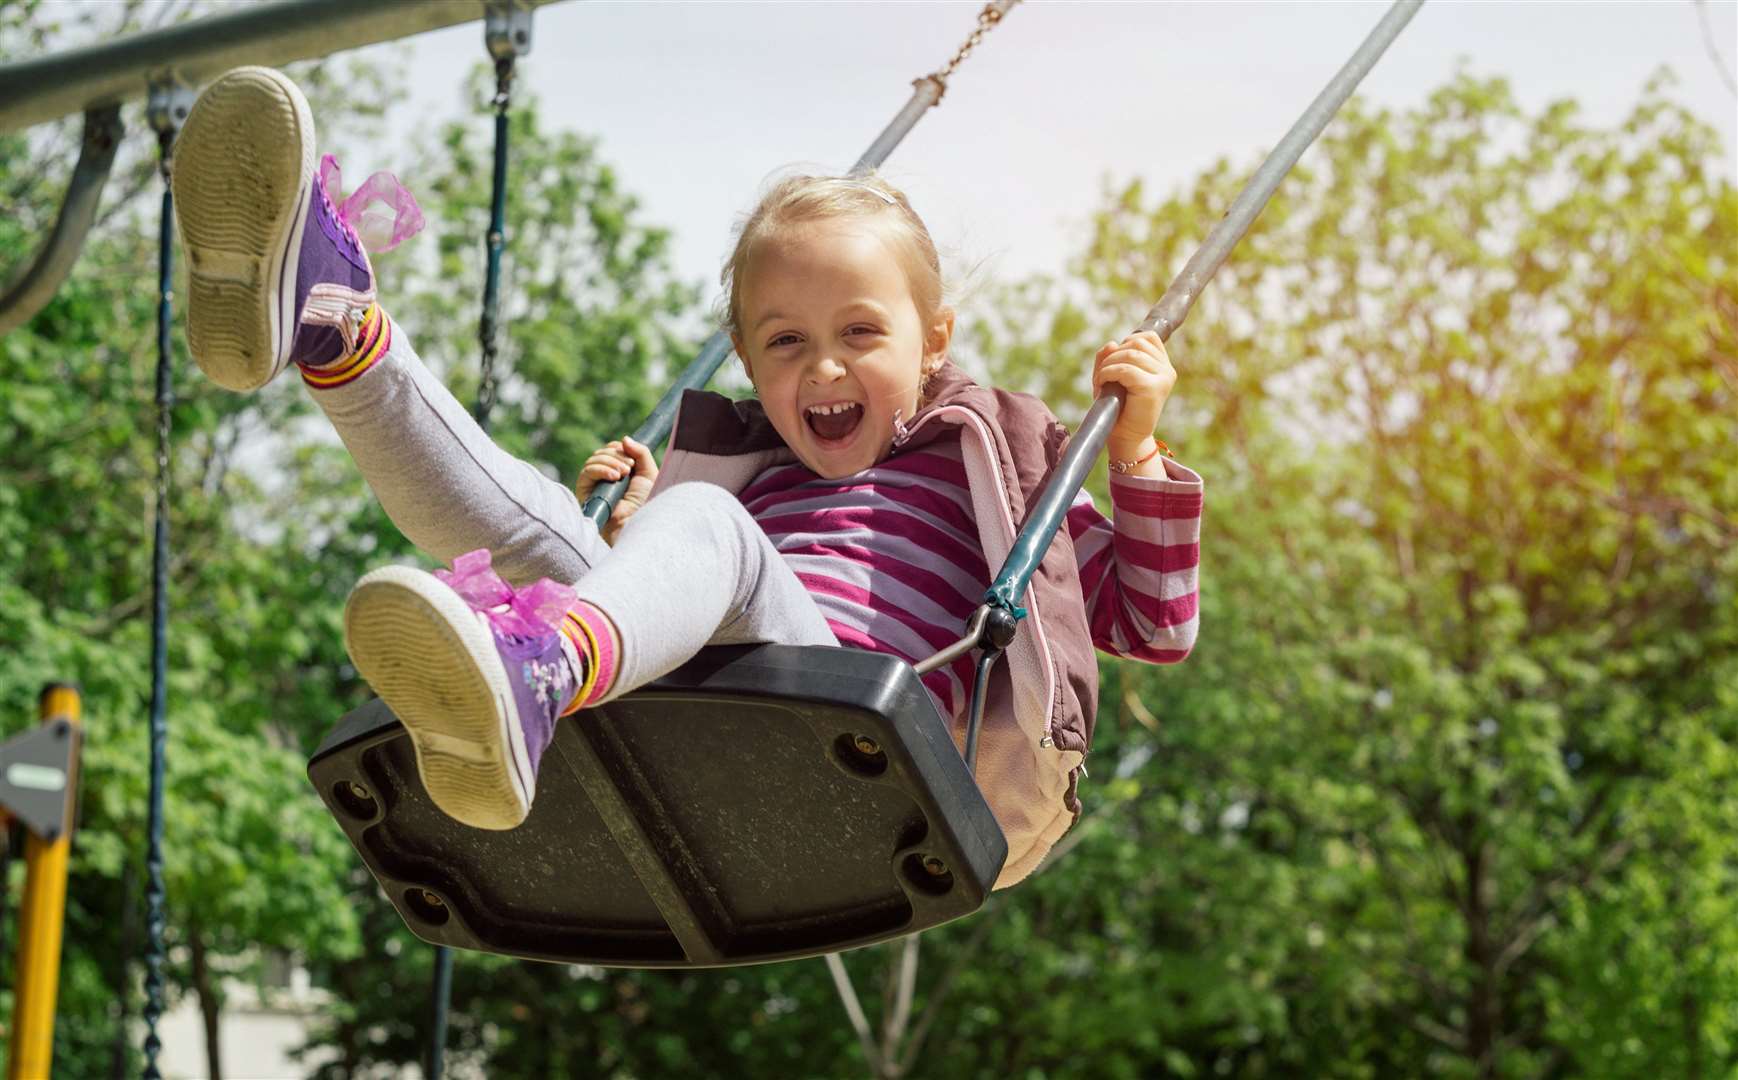 The money contributes to the upkeep of communal areas like parks and playgrounds that aren’t the responsibility of the council. Image: iStock.